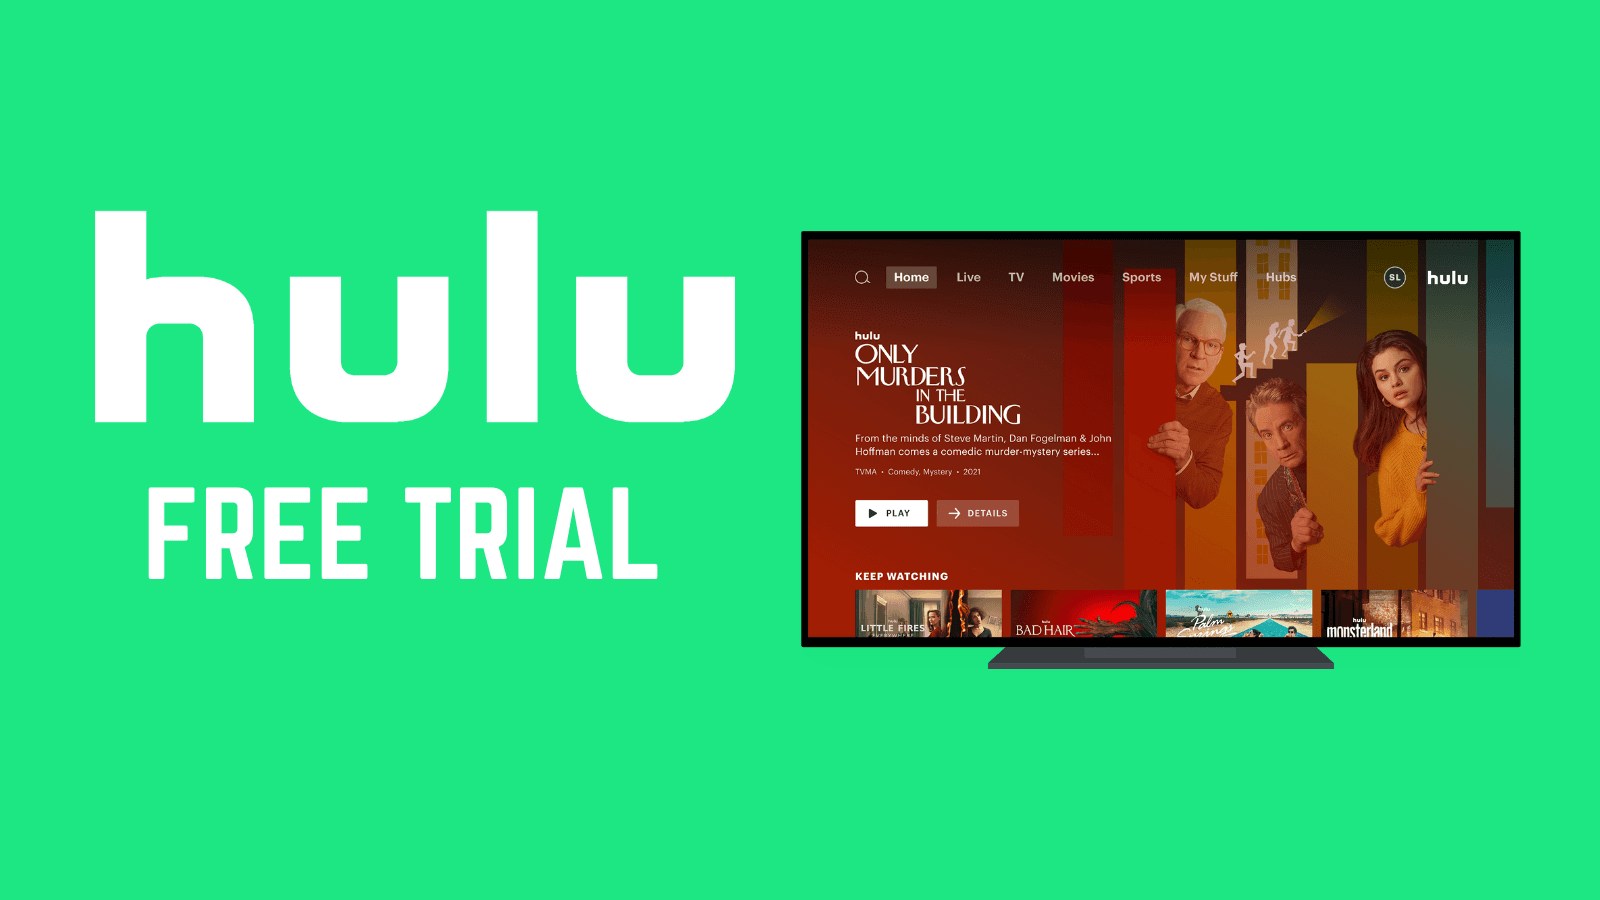 Free hulu accounts are available with a Hulu free trial only. Sign up for the Hulu free trial on this page and get a free Hulu account. The free Hulu account lasts 30 days.